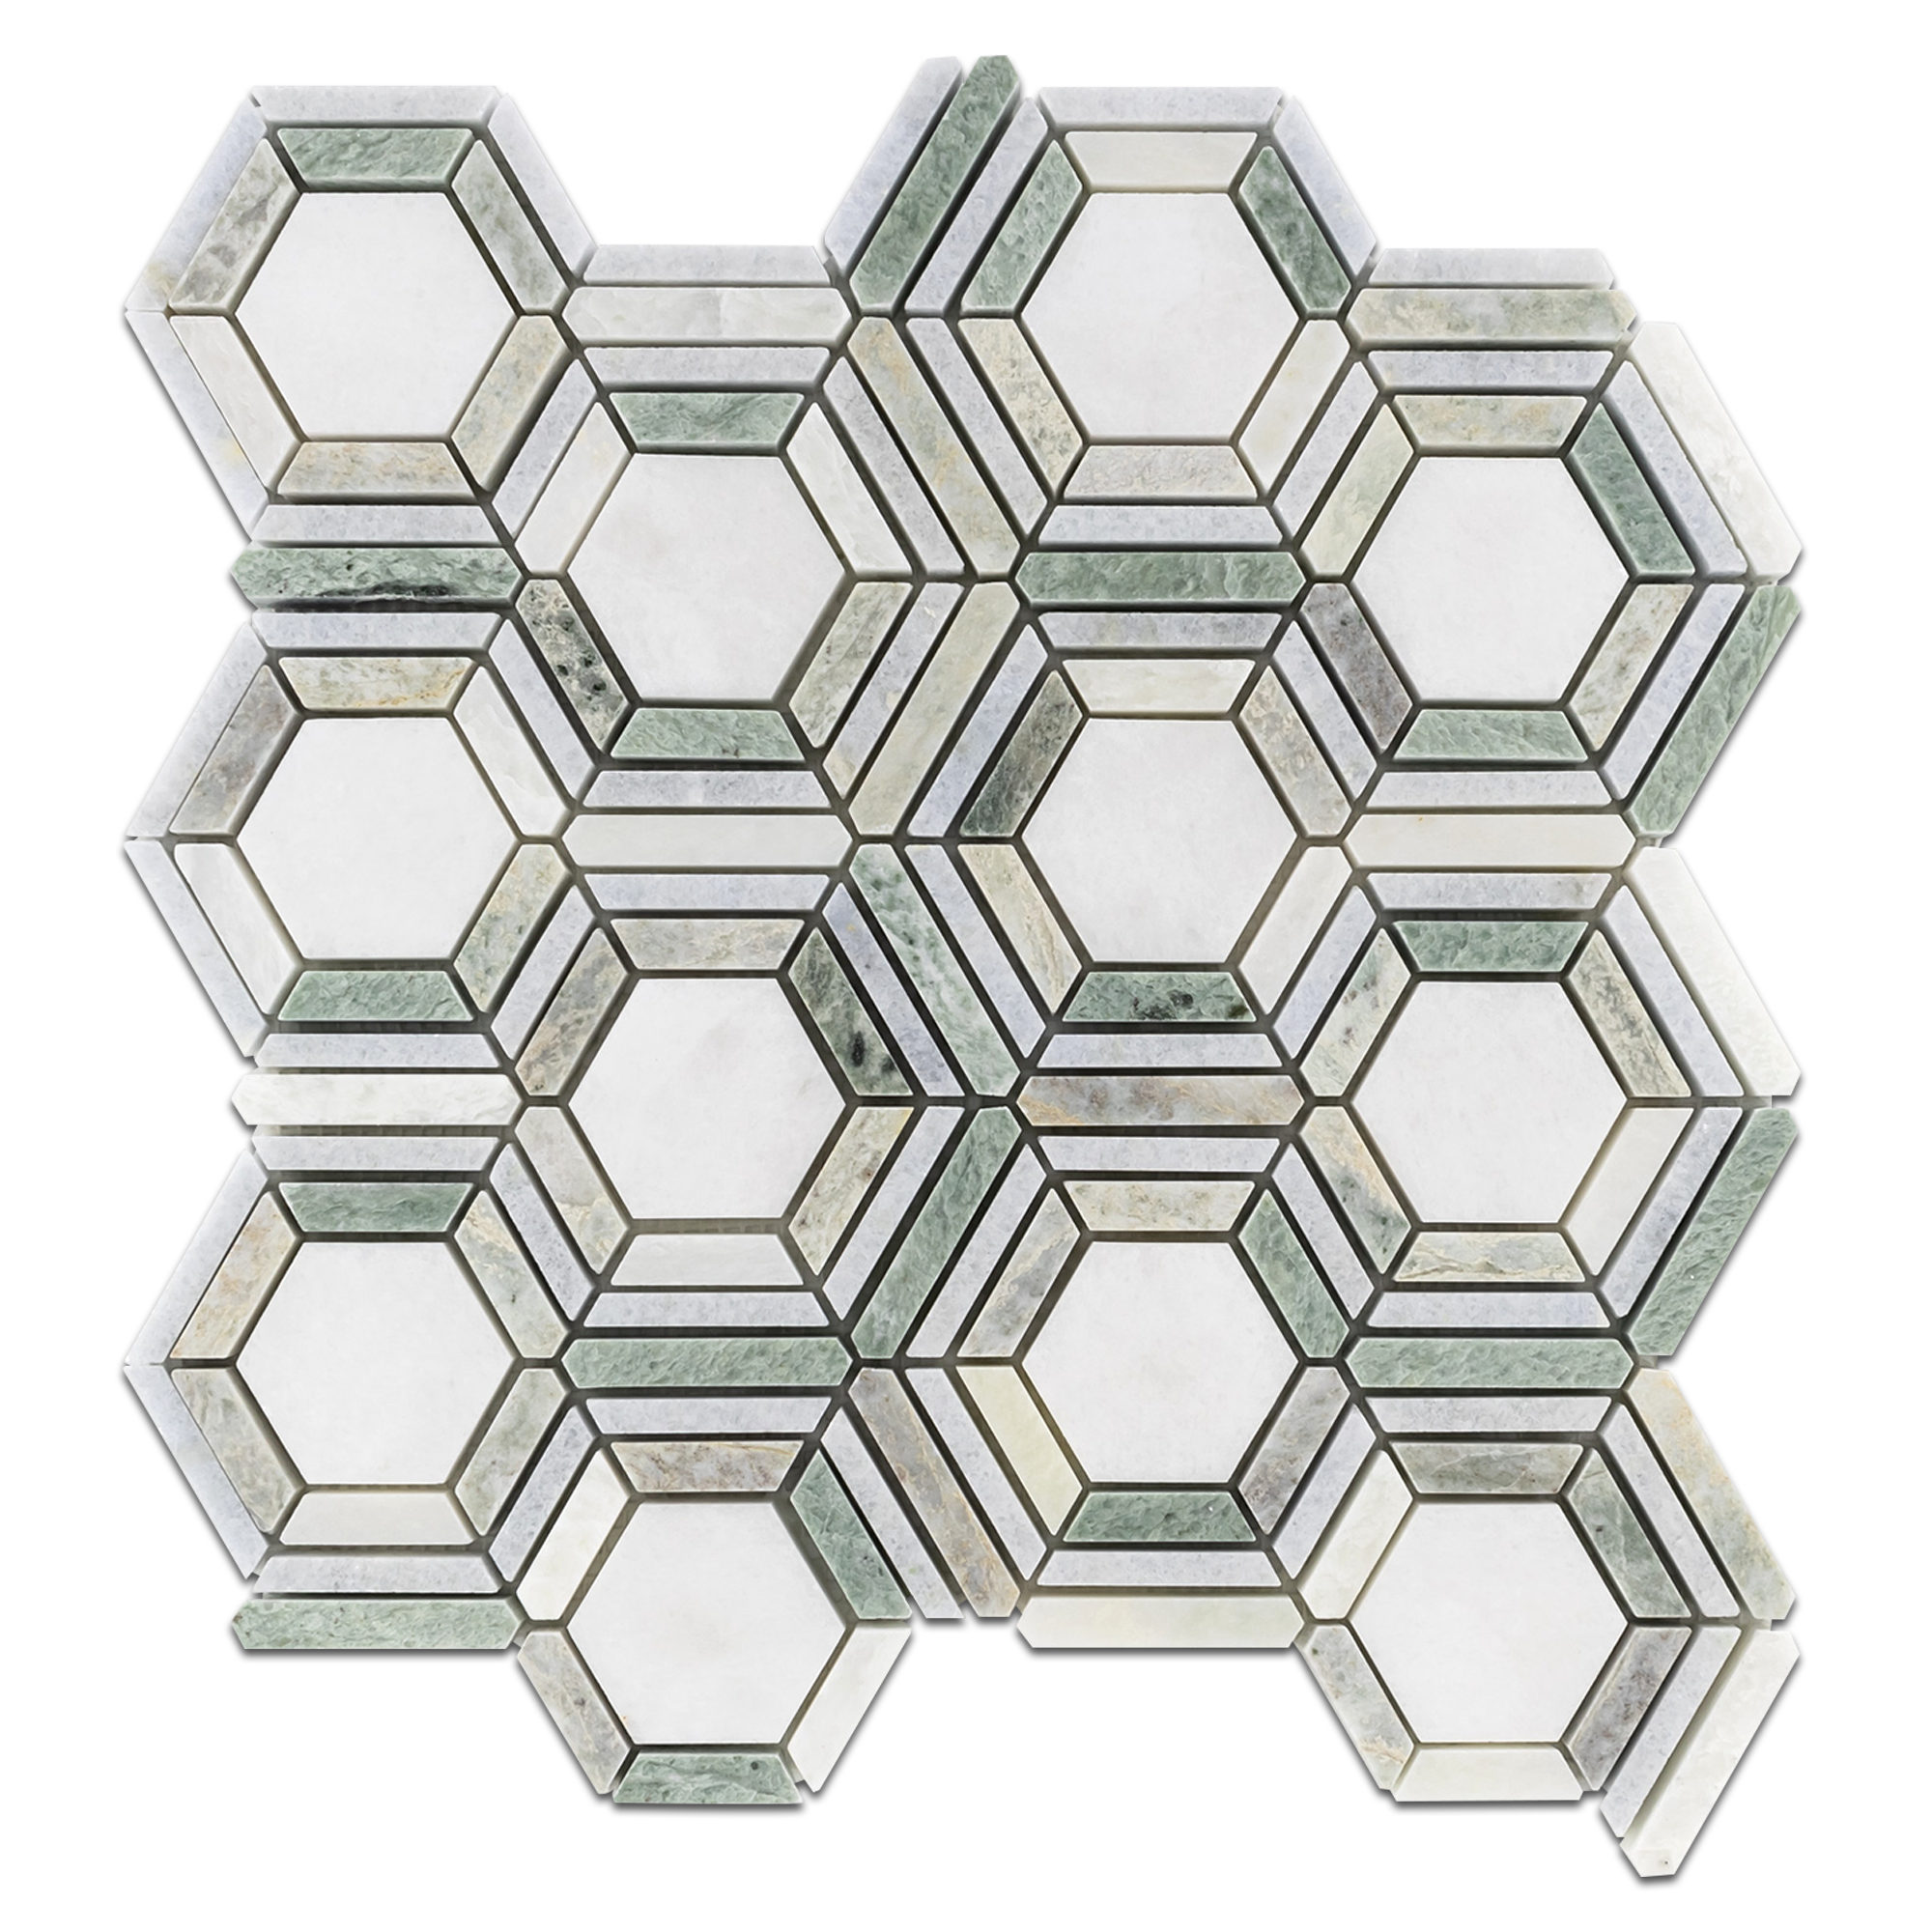 Elon White Thassos Blue Celeste Ming Green Marble Outlined Hexagon Field Mosaic 12.125x12.1875x0.375 Polished AM9061P Surface Group International Product